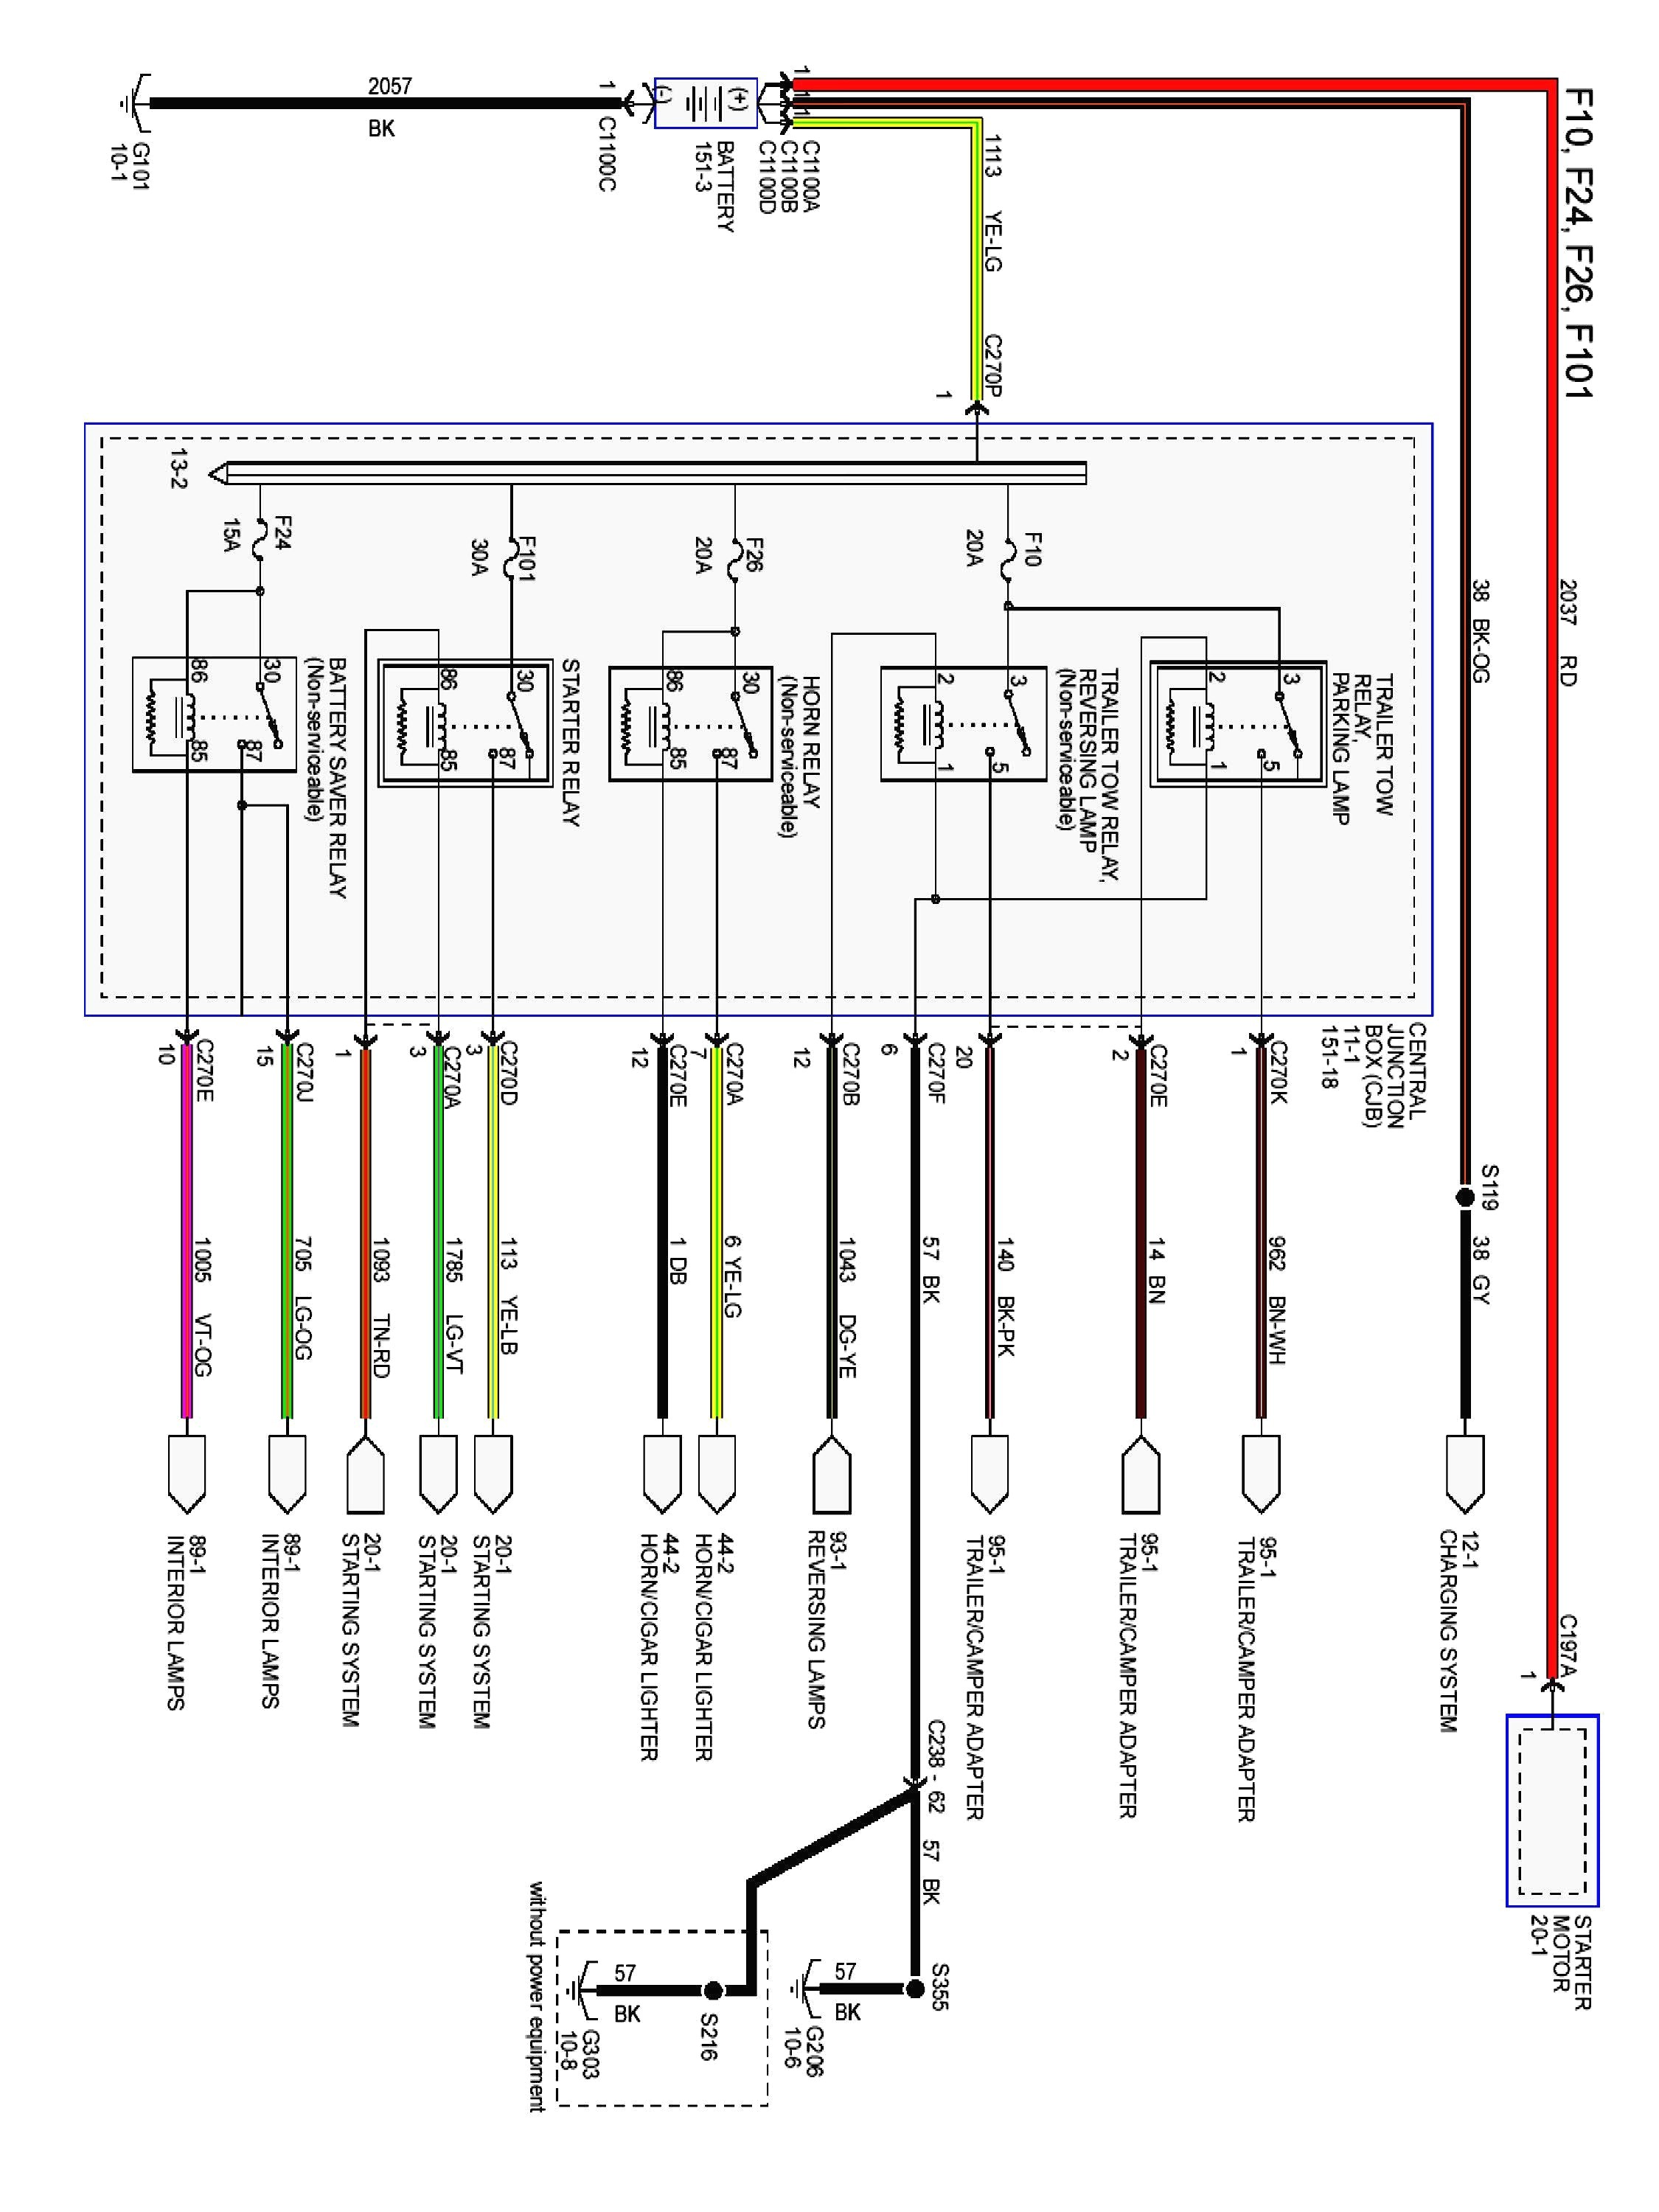 1997 Ford F150 Stereo Wiring Diagram from detoxicrecenze.com